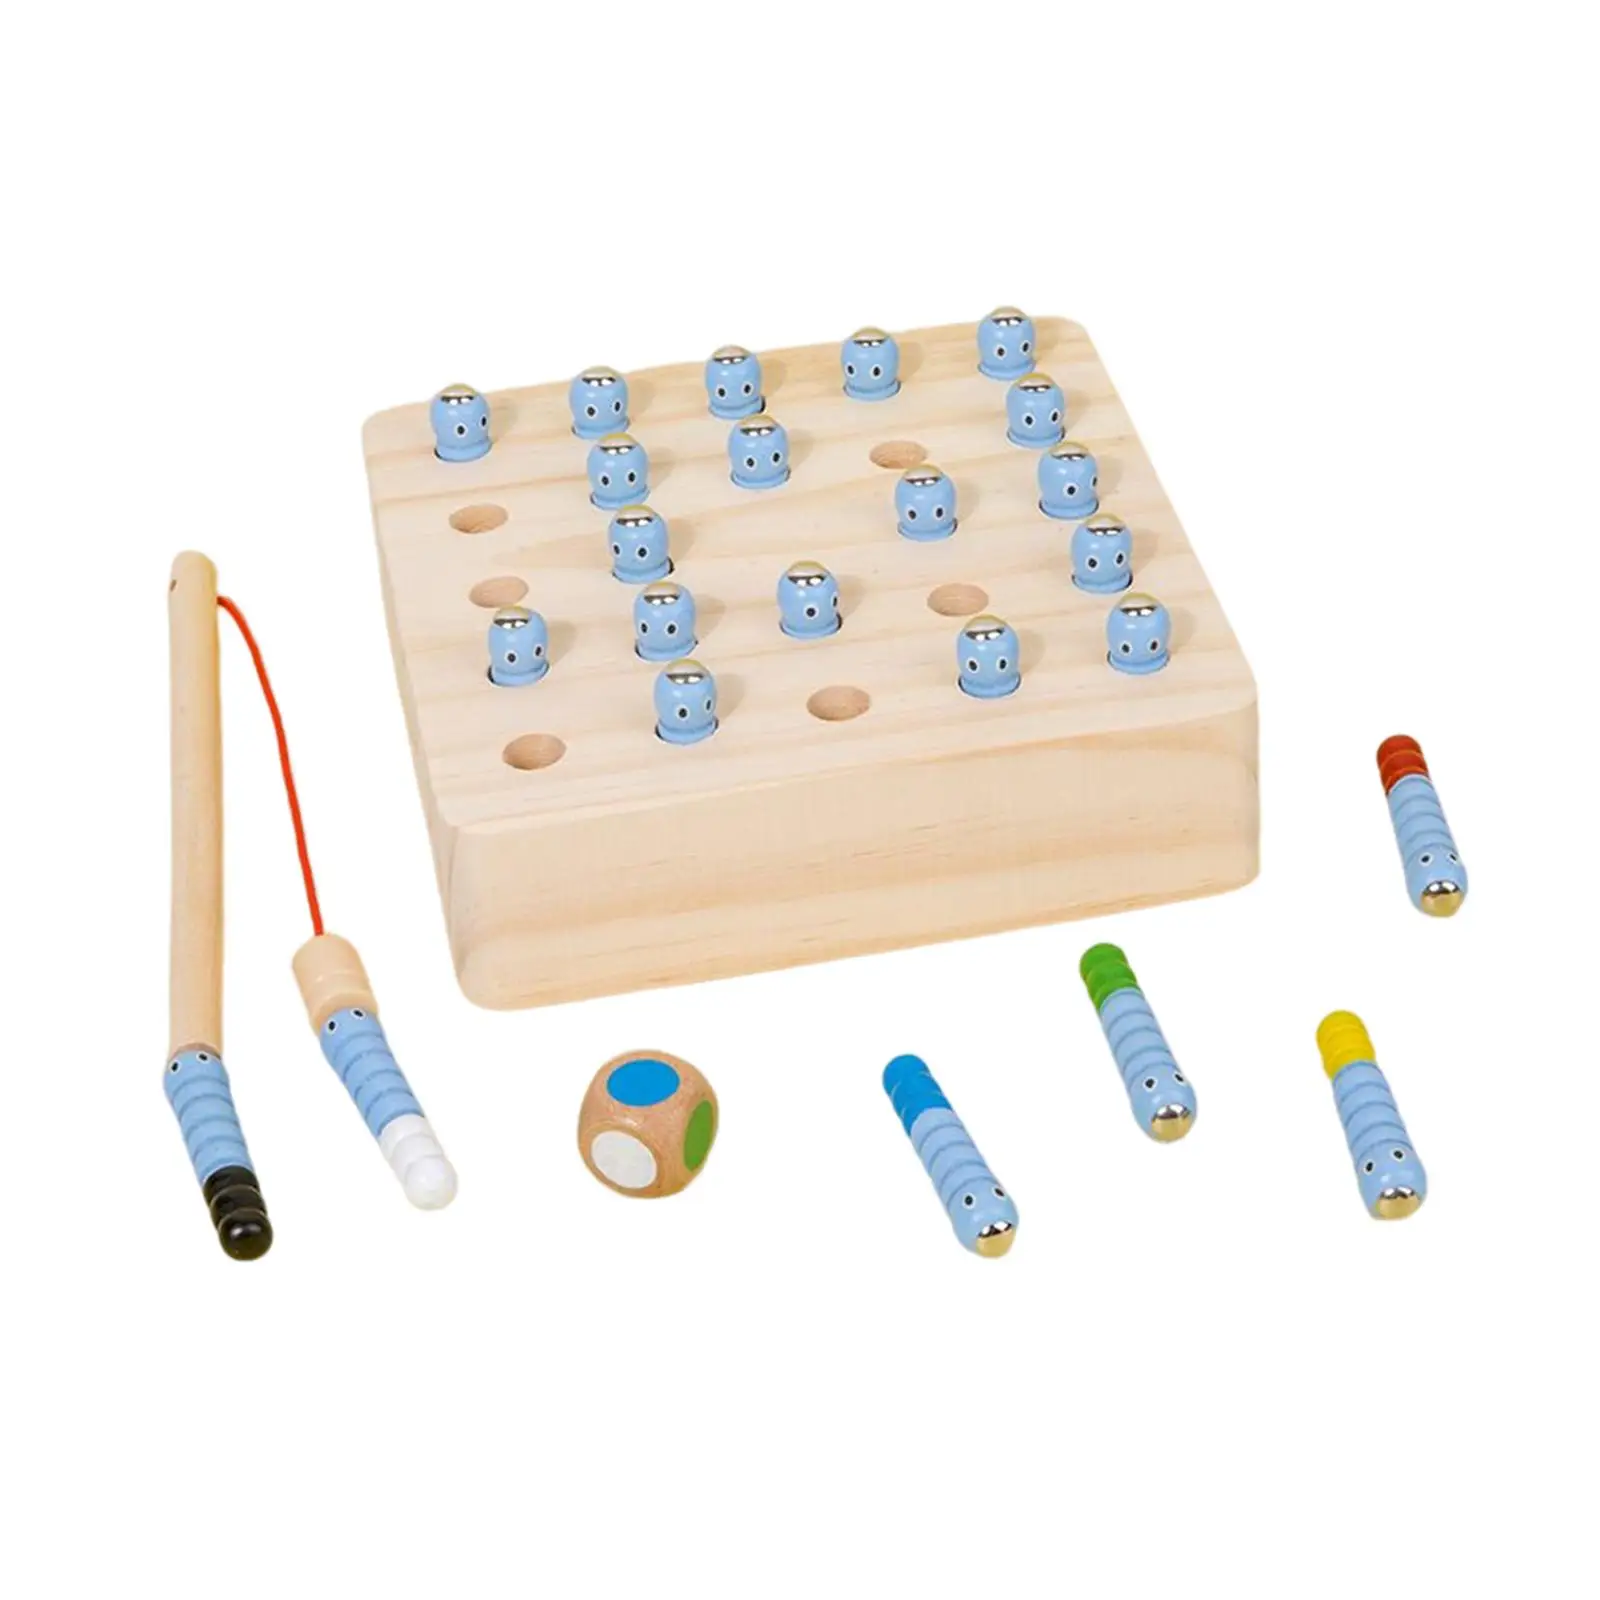 Wooden Fishing Game Toy Memory Training Development Sorting Board Game Busy Board Wood Montessori Catching Worm for Children